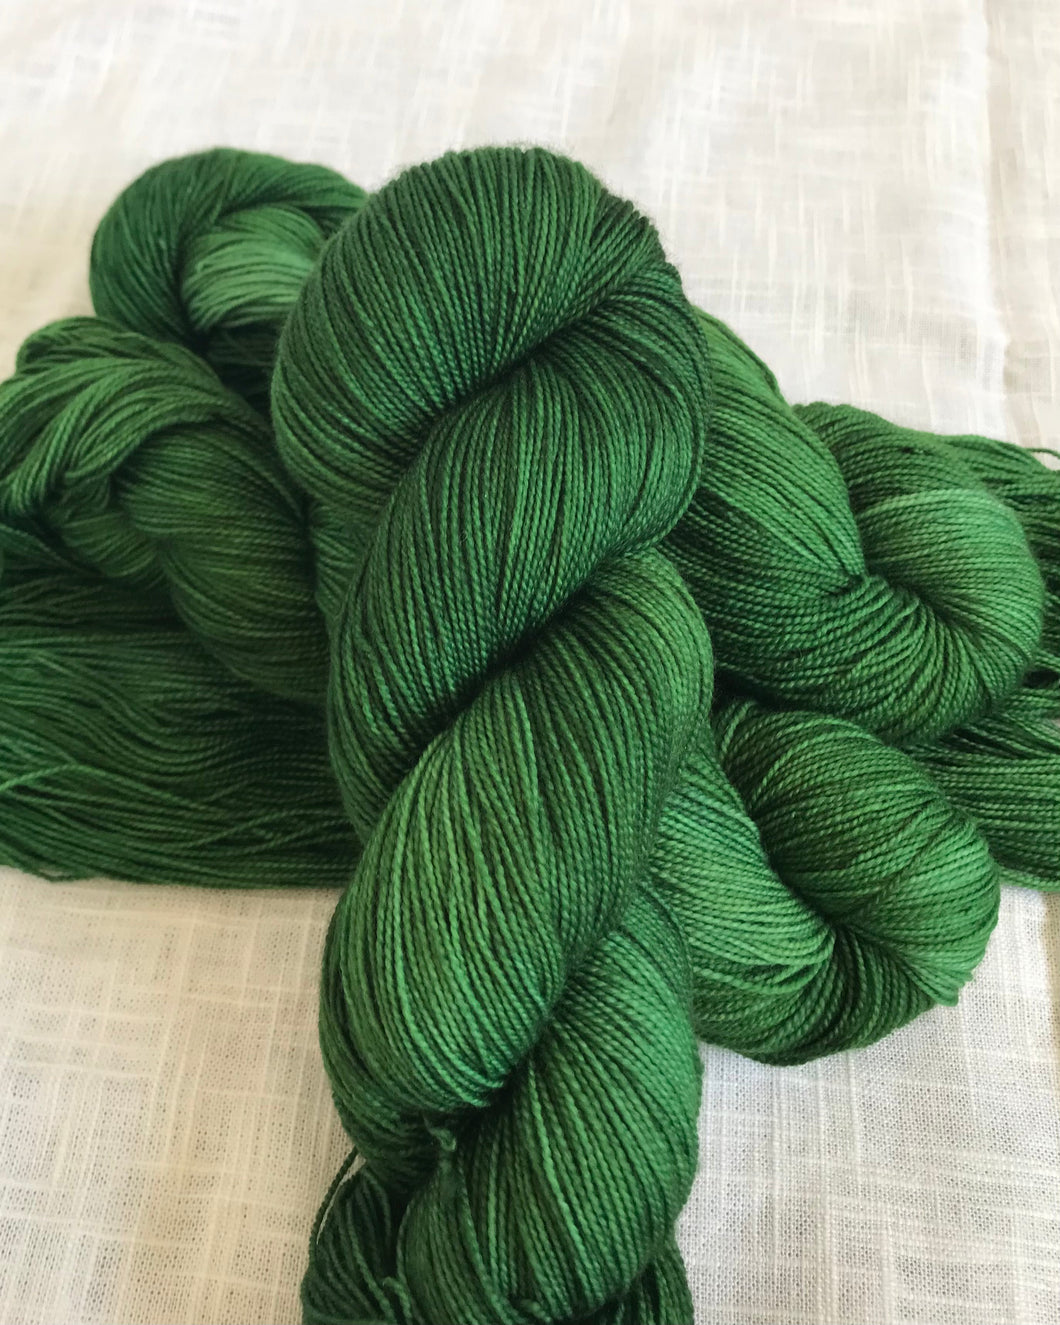 Courage - In Stock (Sock - old base)